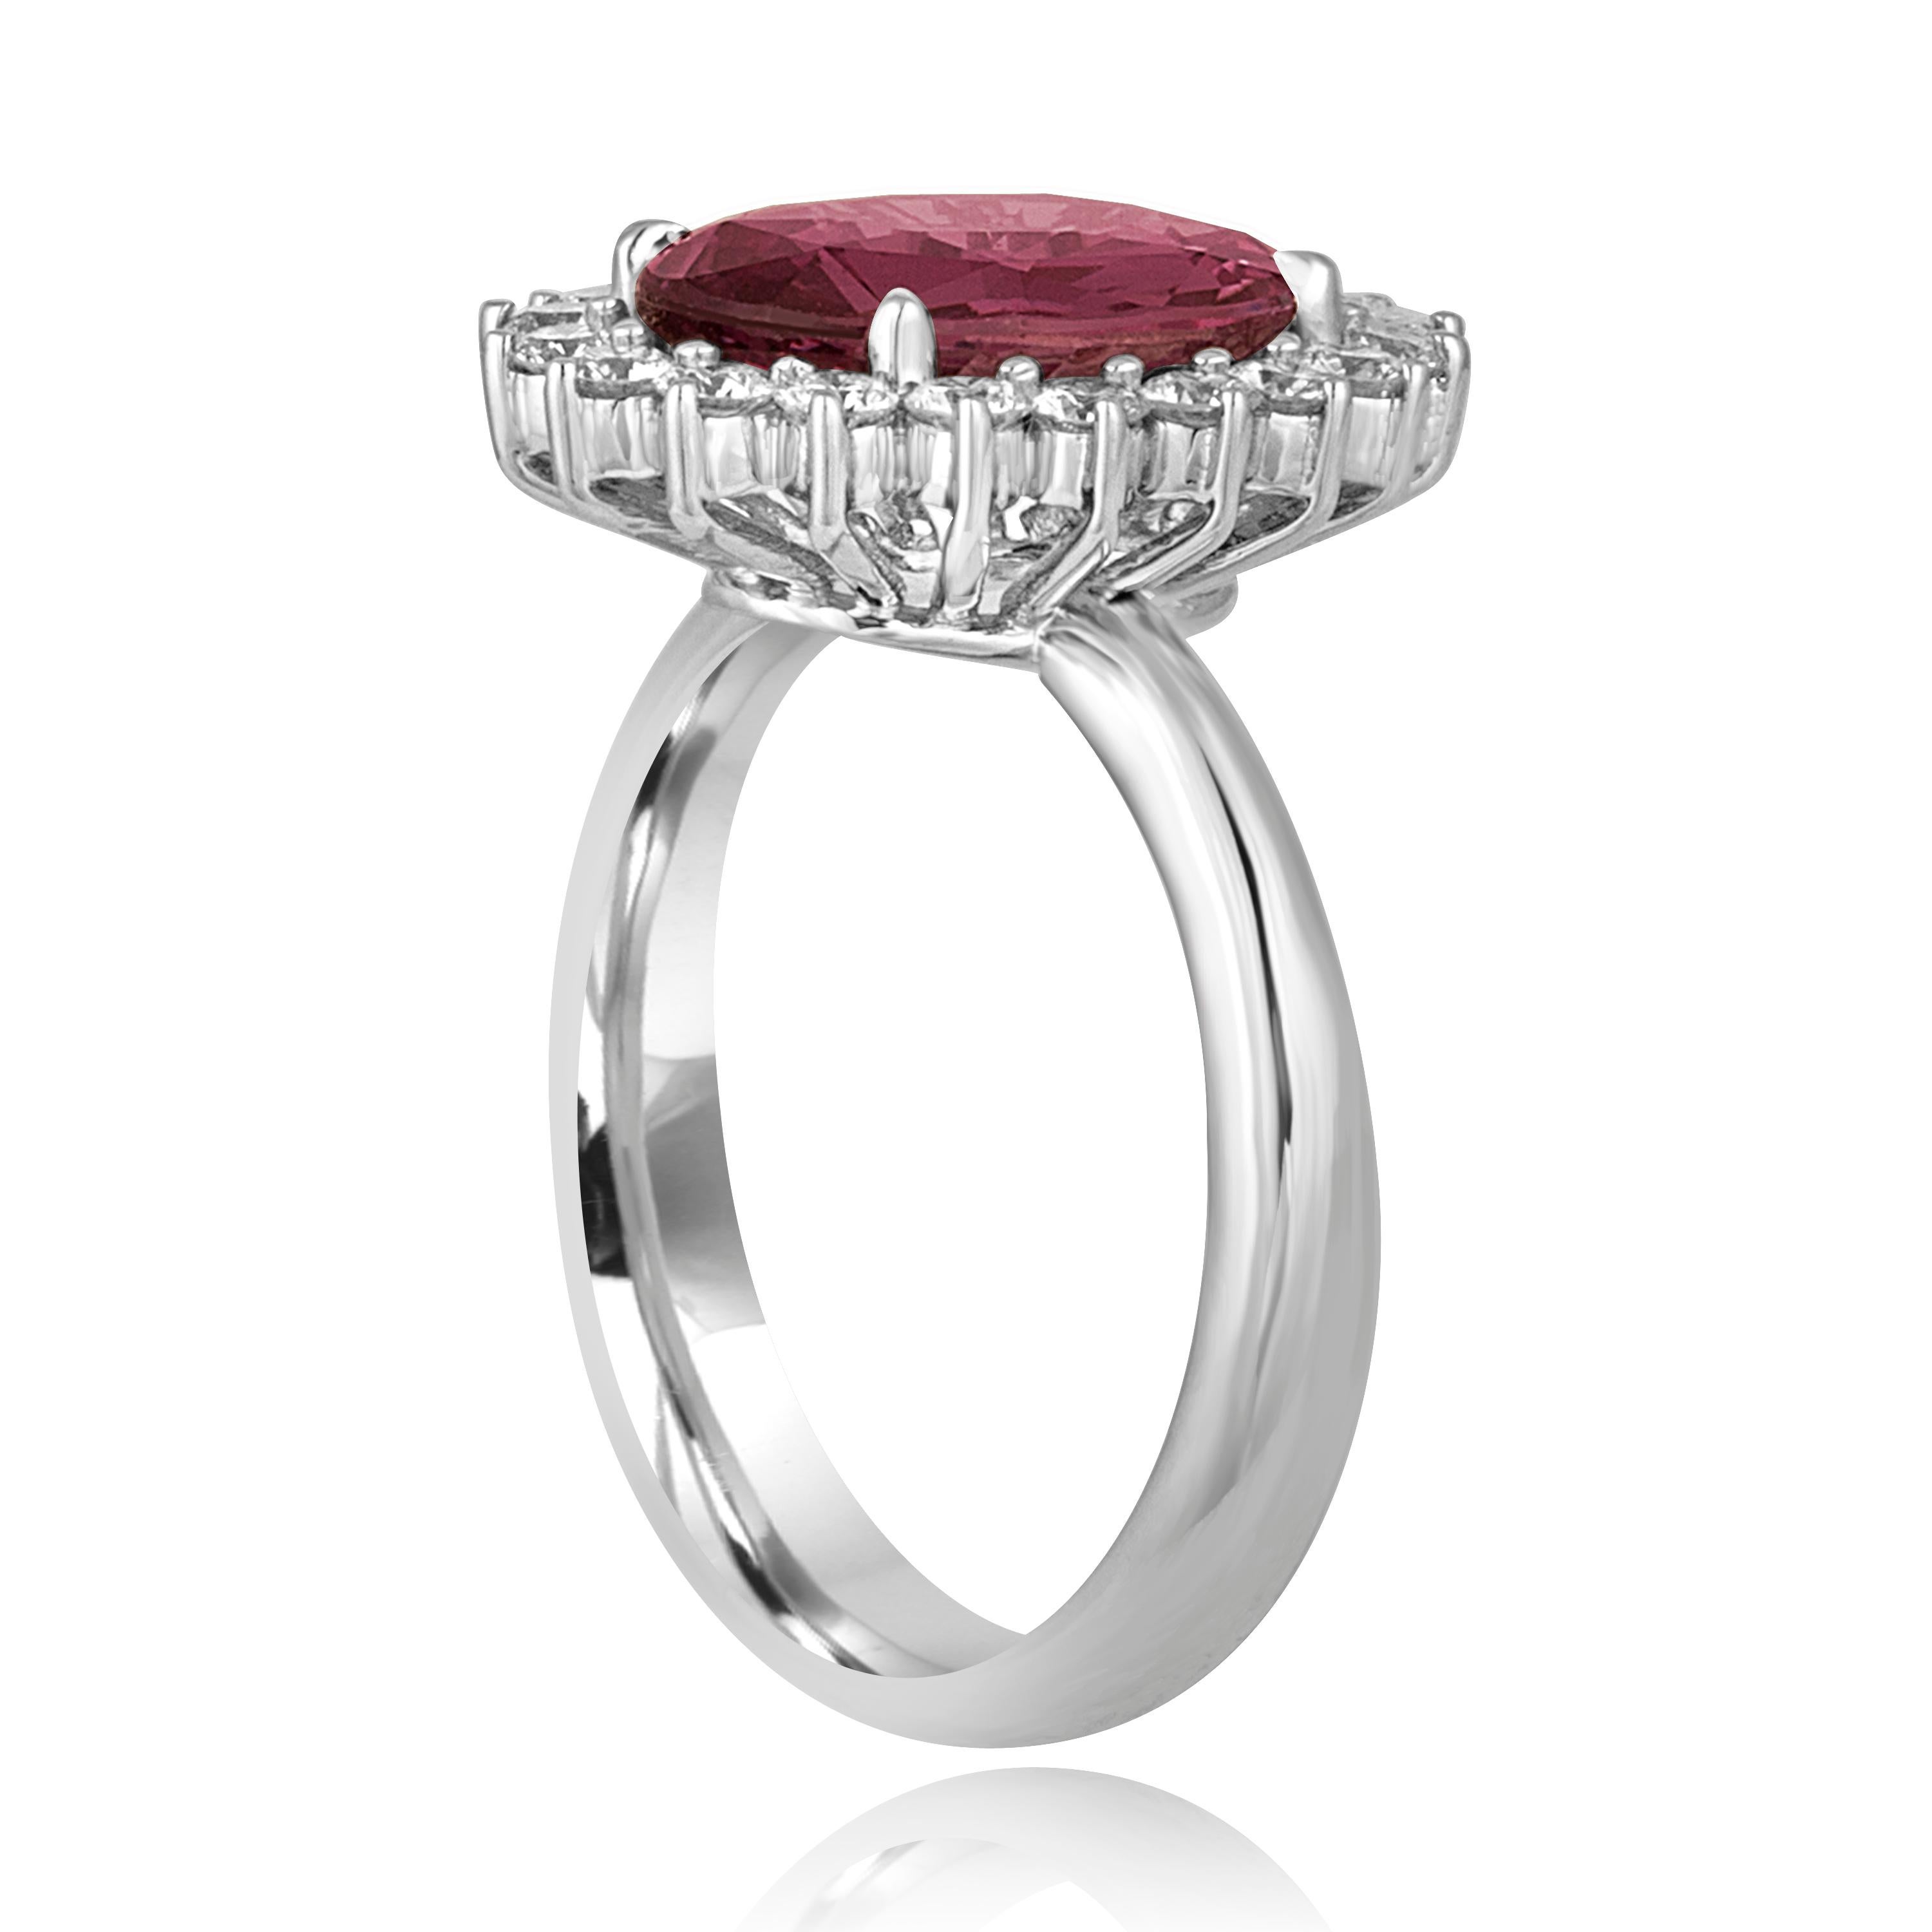 Beautiful Oval Halo Ring.
The ring is 18K White Gold.
The ring has 0.61 Carats in diamonds F/G VS.
The center stone is an oval shaped 4.06 Carat Pink Sapphire.
The Sapphire is heated and is certified by AGL. 
The top of the ring measures 11/16